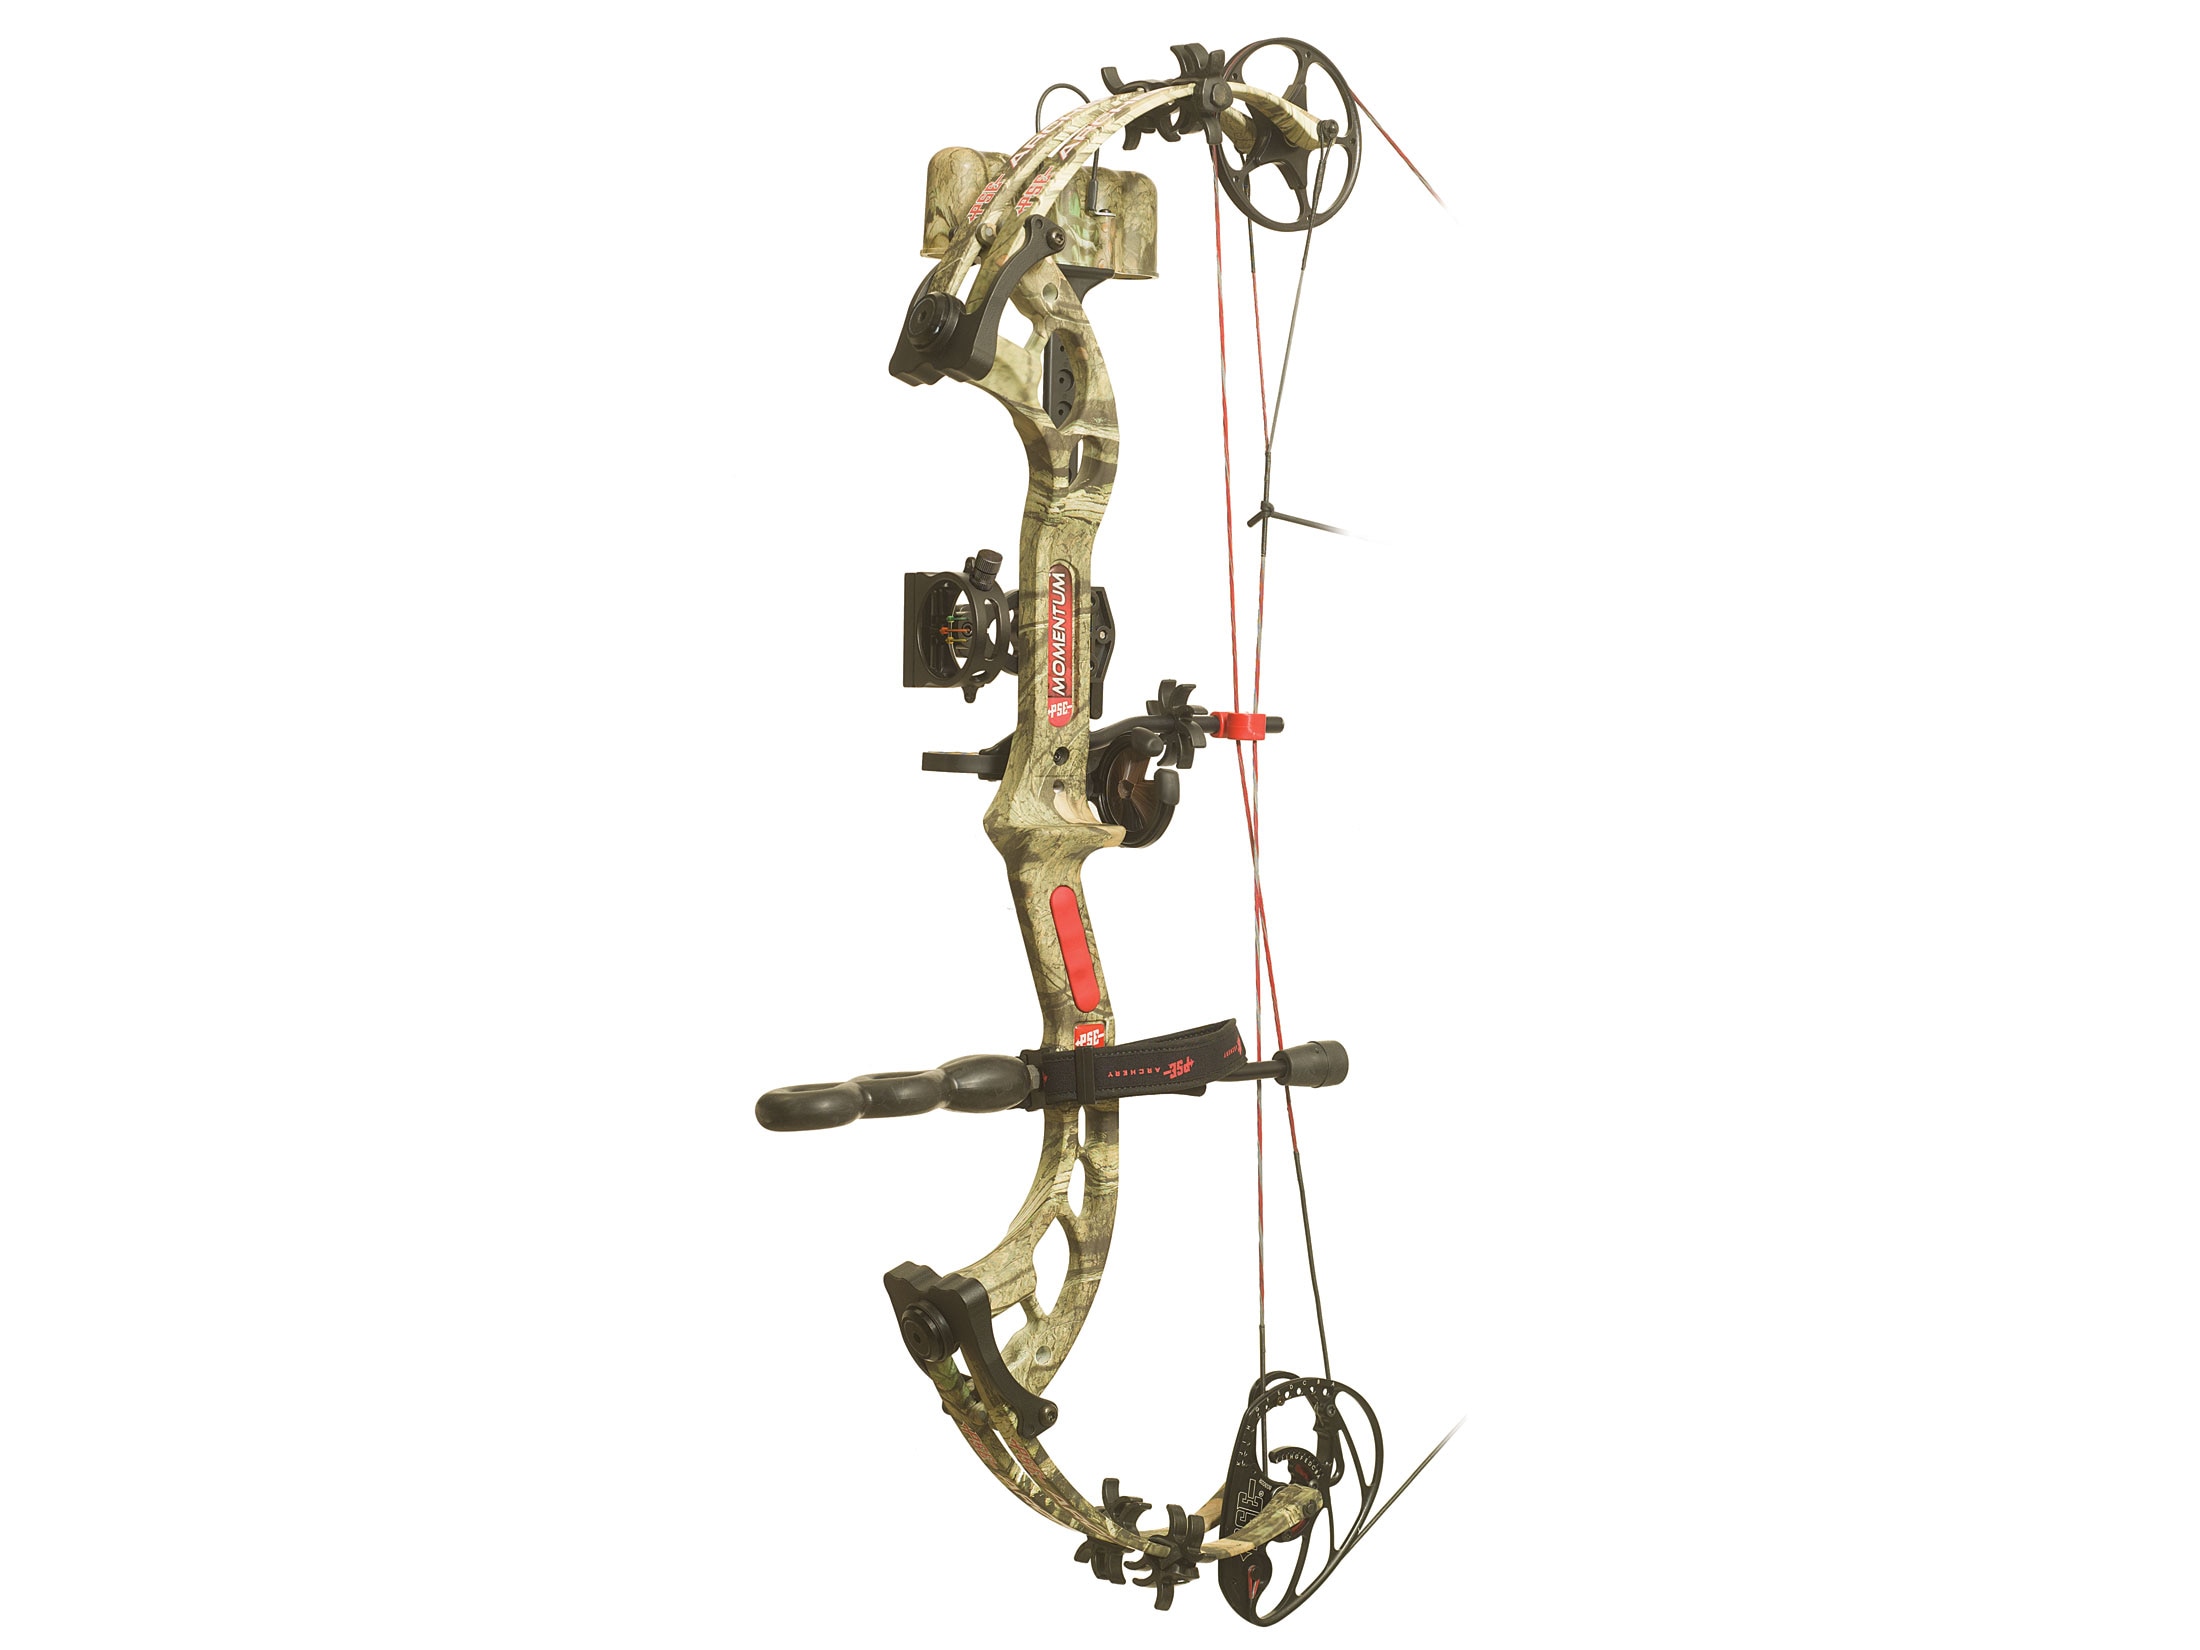 Compound Bow Mount Rail Stabilizer Fishing Reel Seat Laser Sight